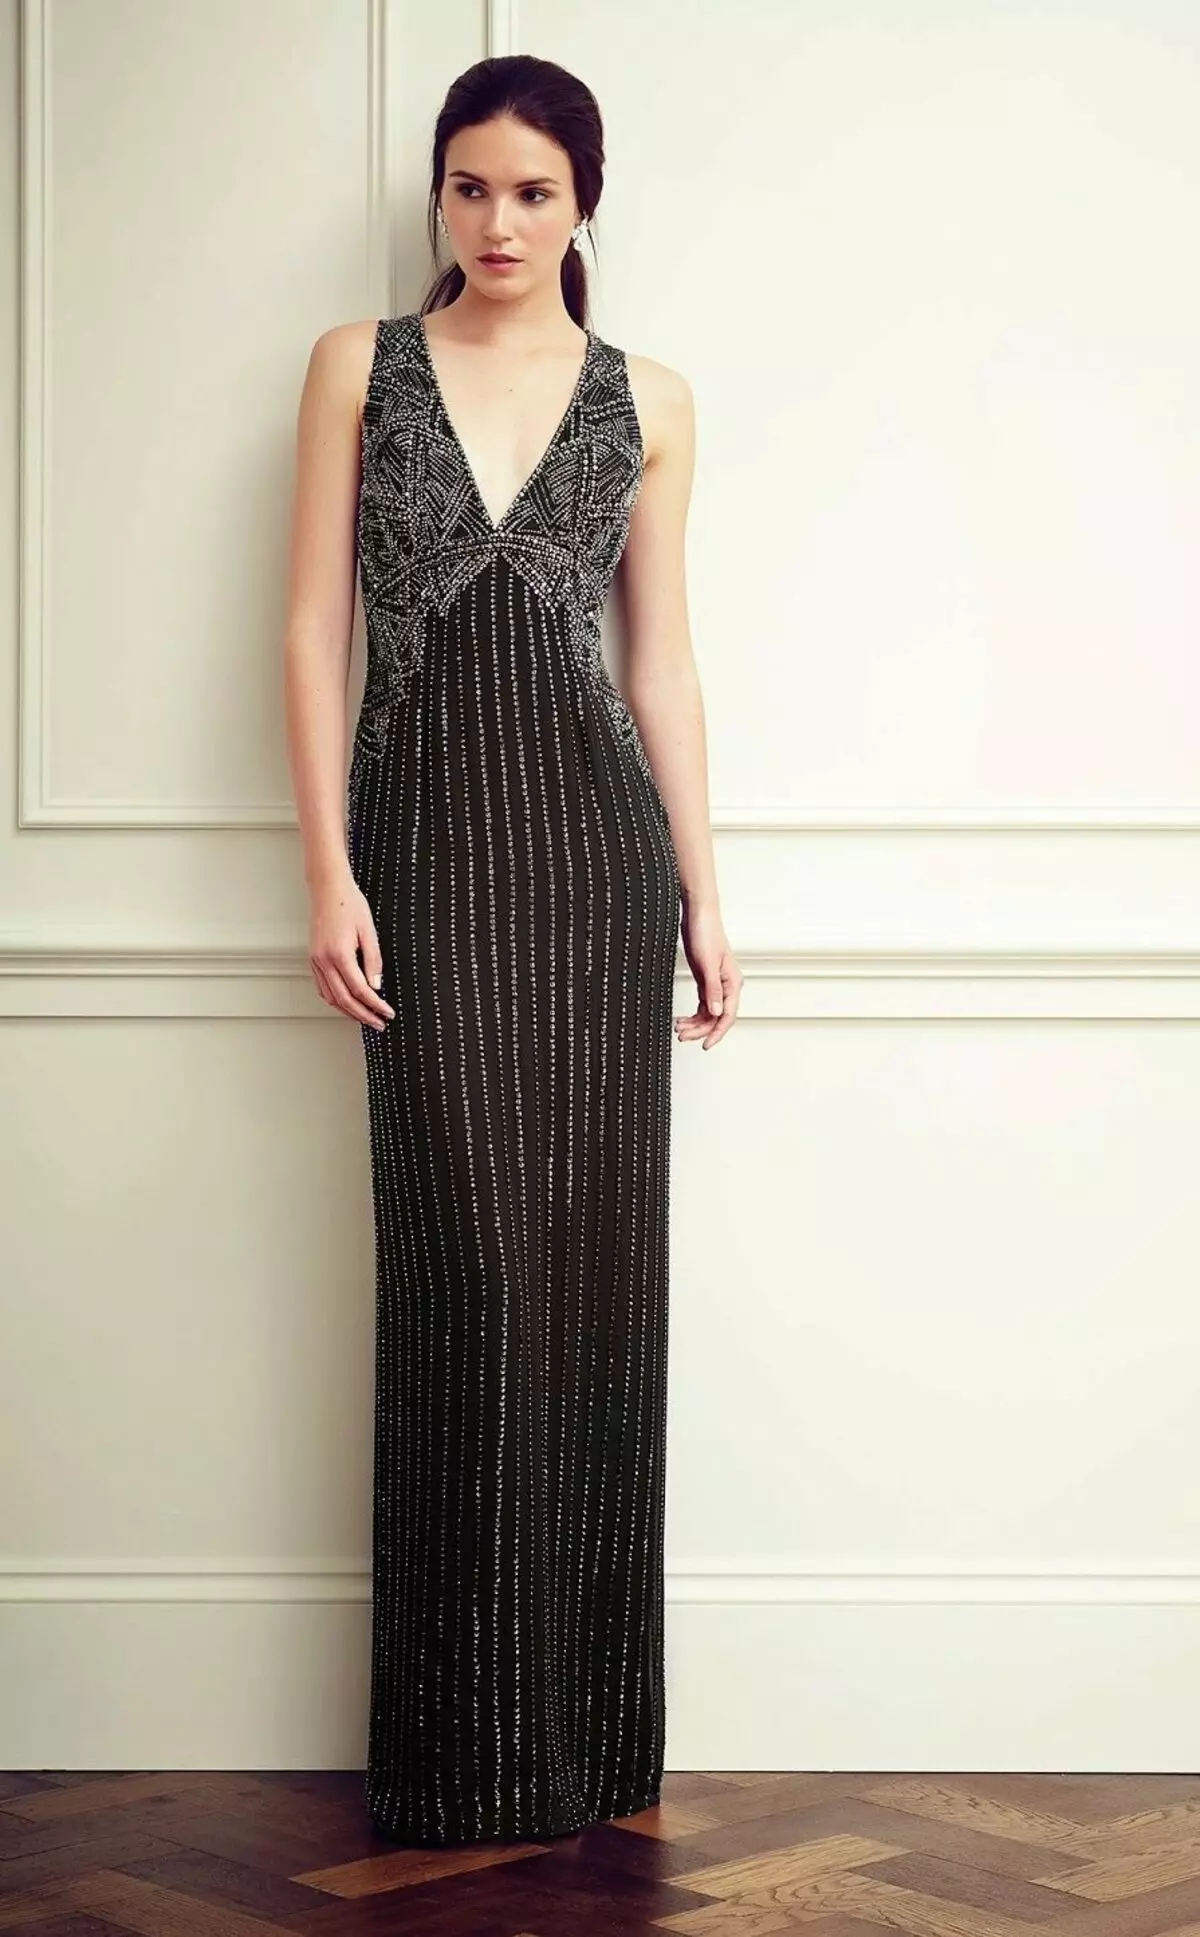 Direct evening dress with silver thread